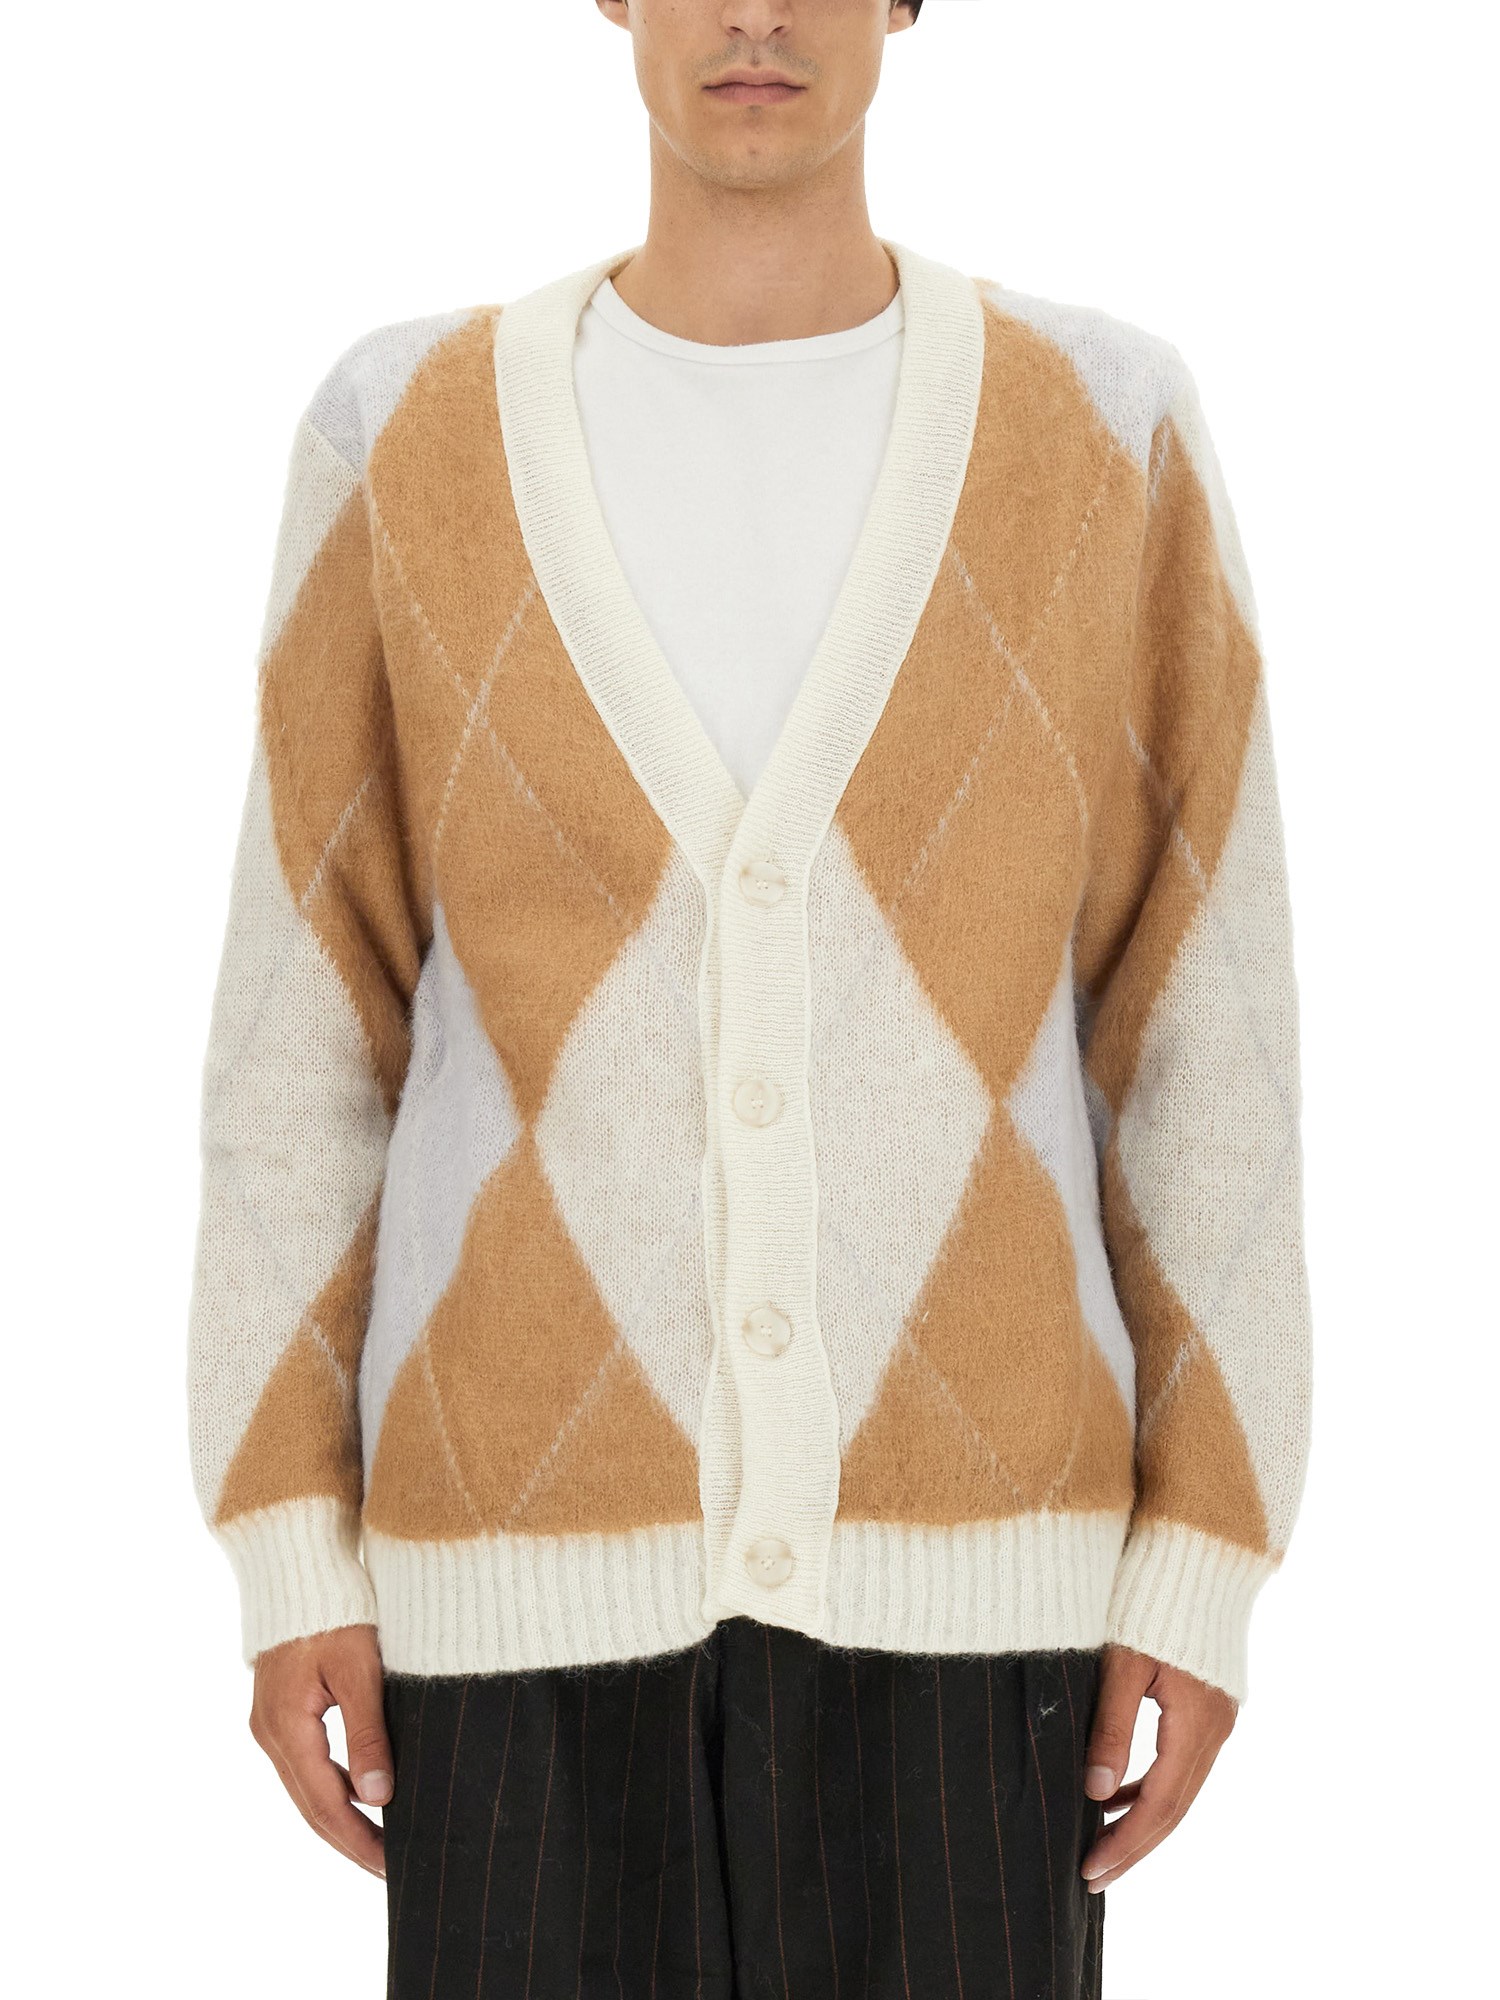 Family First family first v-neck cardigan